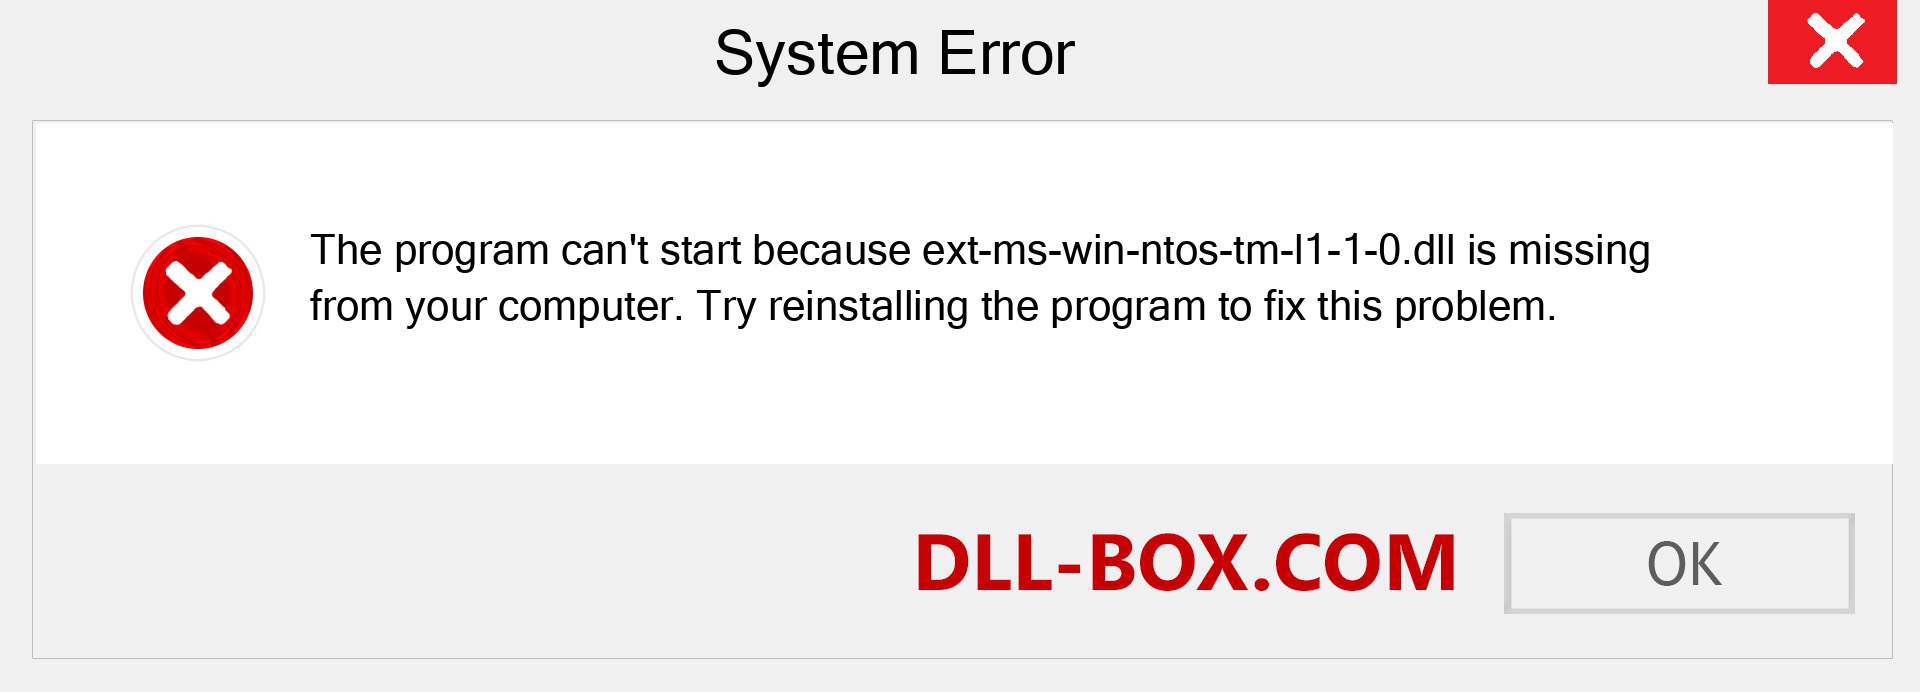  ext-ms-win-ntos-tm-l1-1-0.dll file is missing?. Download for Windows 7, 8, 10 - Fix  ext-ms-win-ntos-tm-l1-1-0 dll Missing Error on Windows, photos, images